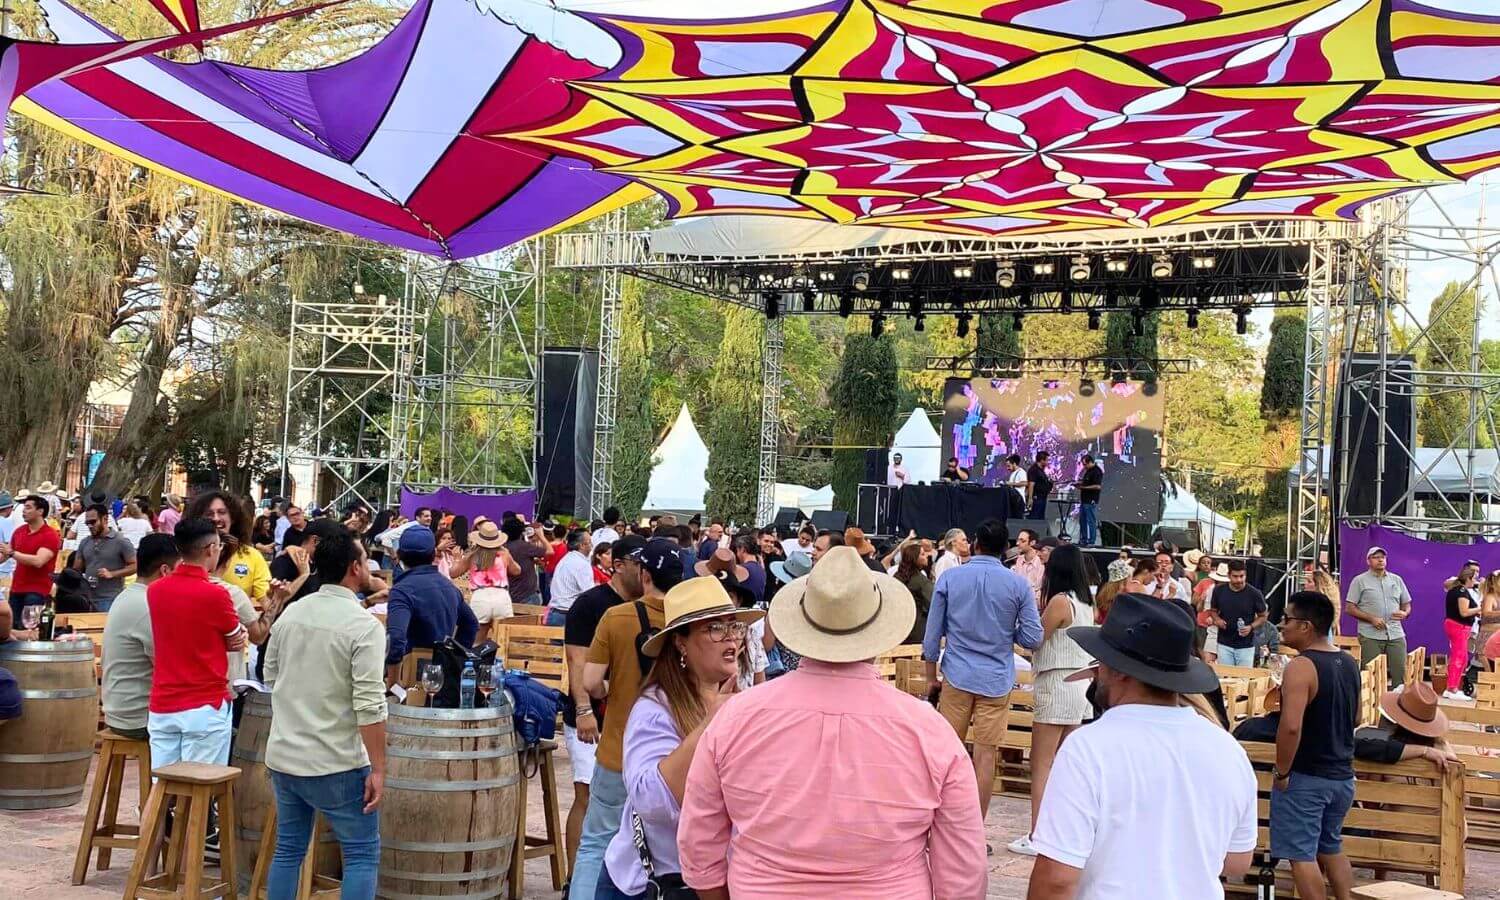 A crowd listening to a live band at the National Cheese and Wine Festival in Tequisquiapan